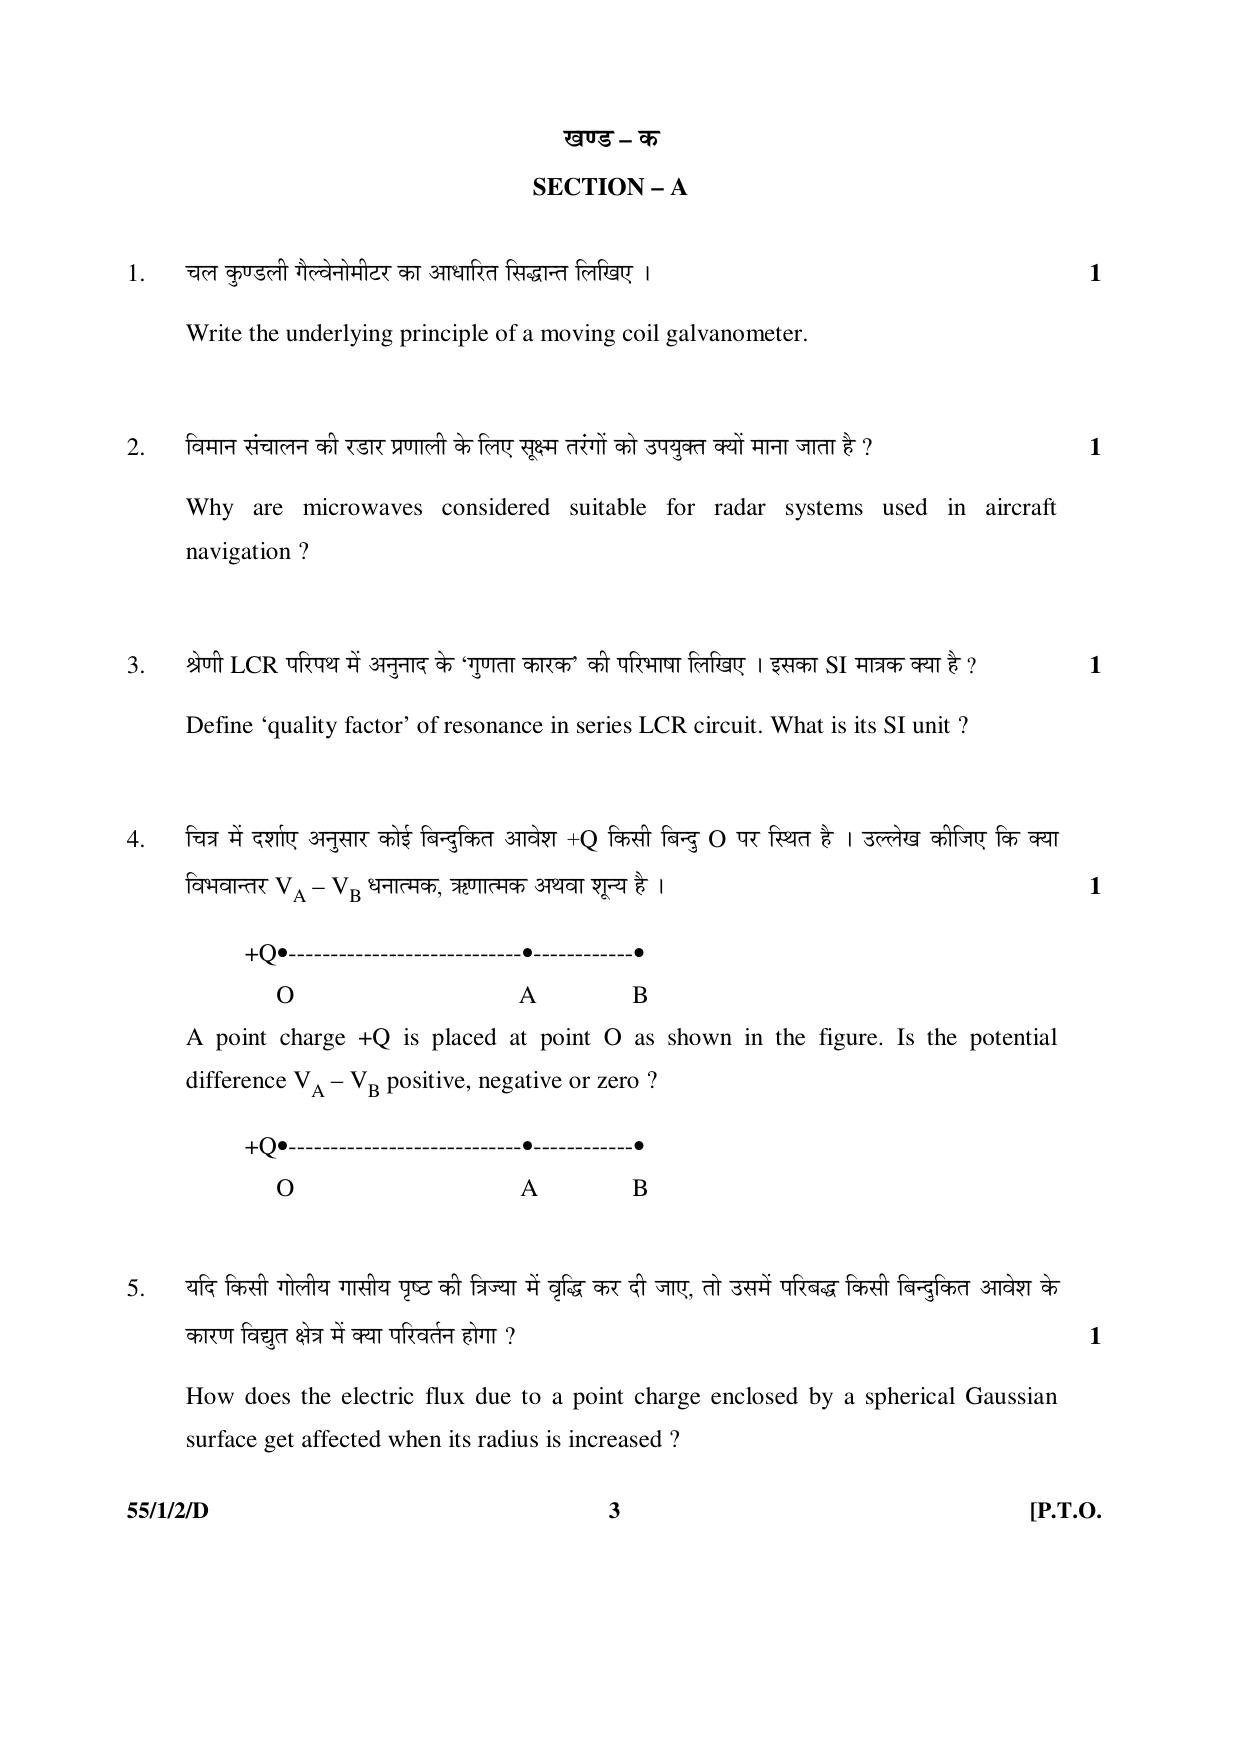 CBSE Class 12 55-1-2-D PHYSICS 2016 Question Paper - Page 3